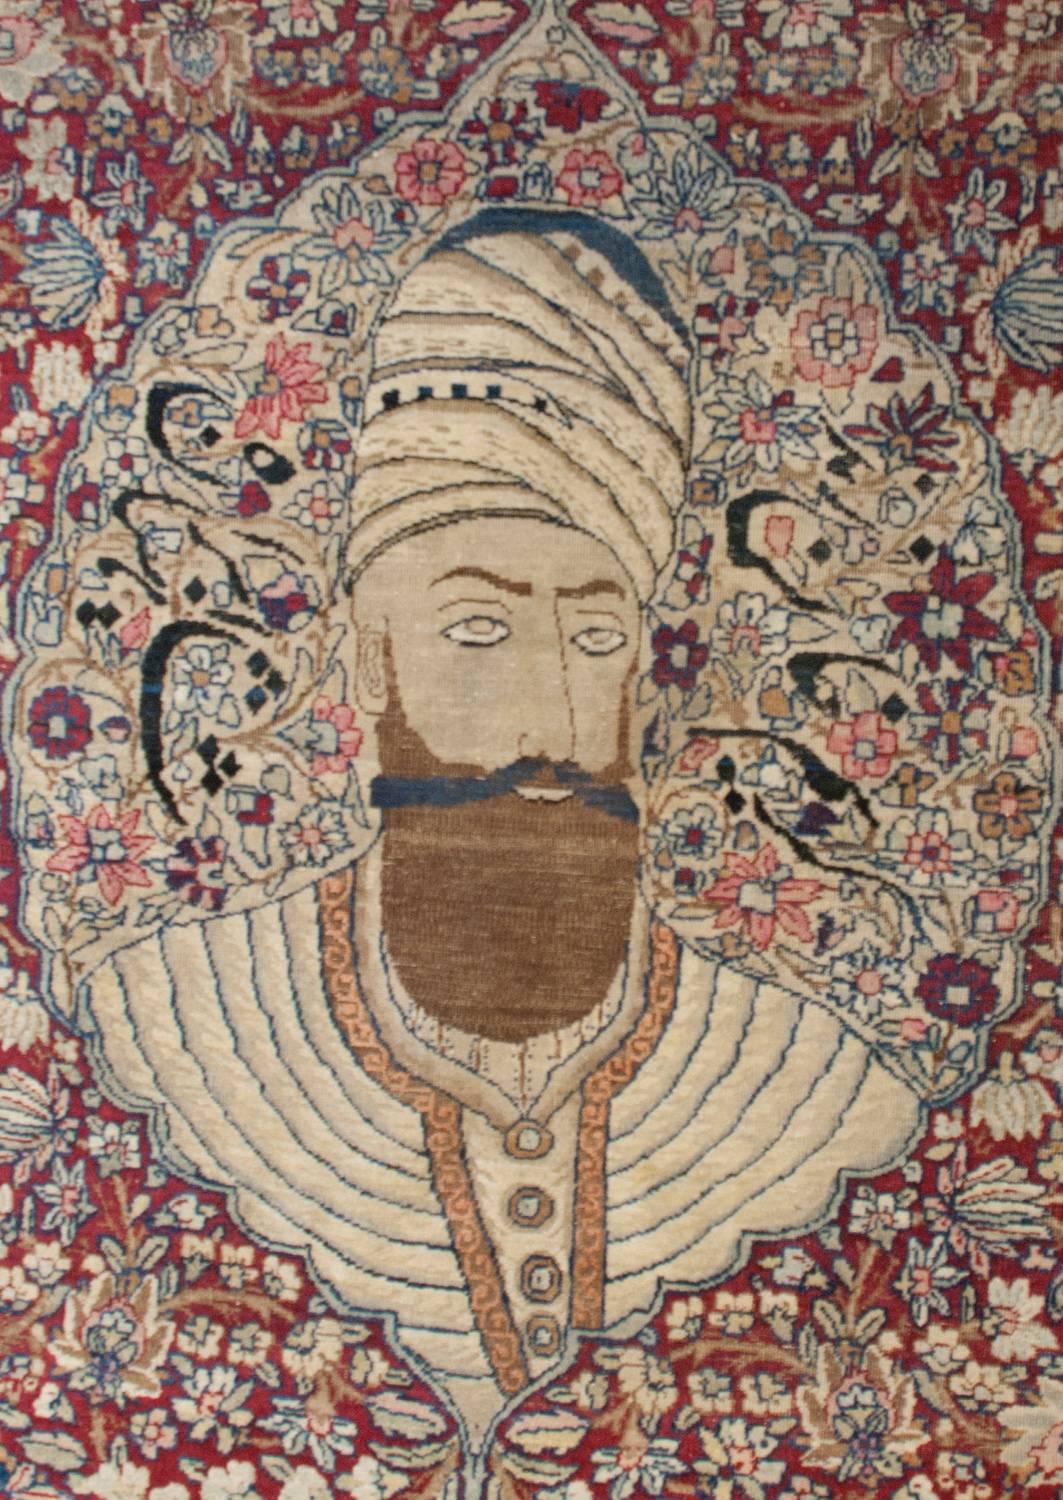 An outstanding notable 19th century Persian Kirman rug with a beautifully rendered depiction of the 18th century founder of the Zandieh Dynasty, Karim Khan in the center woven amidst a wonderful field of flowers. The portrait floats above a